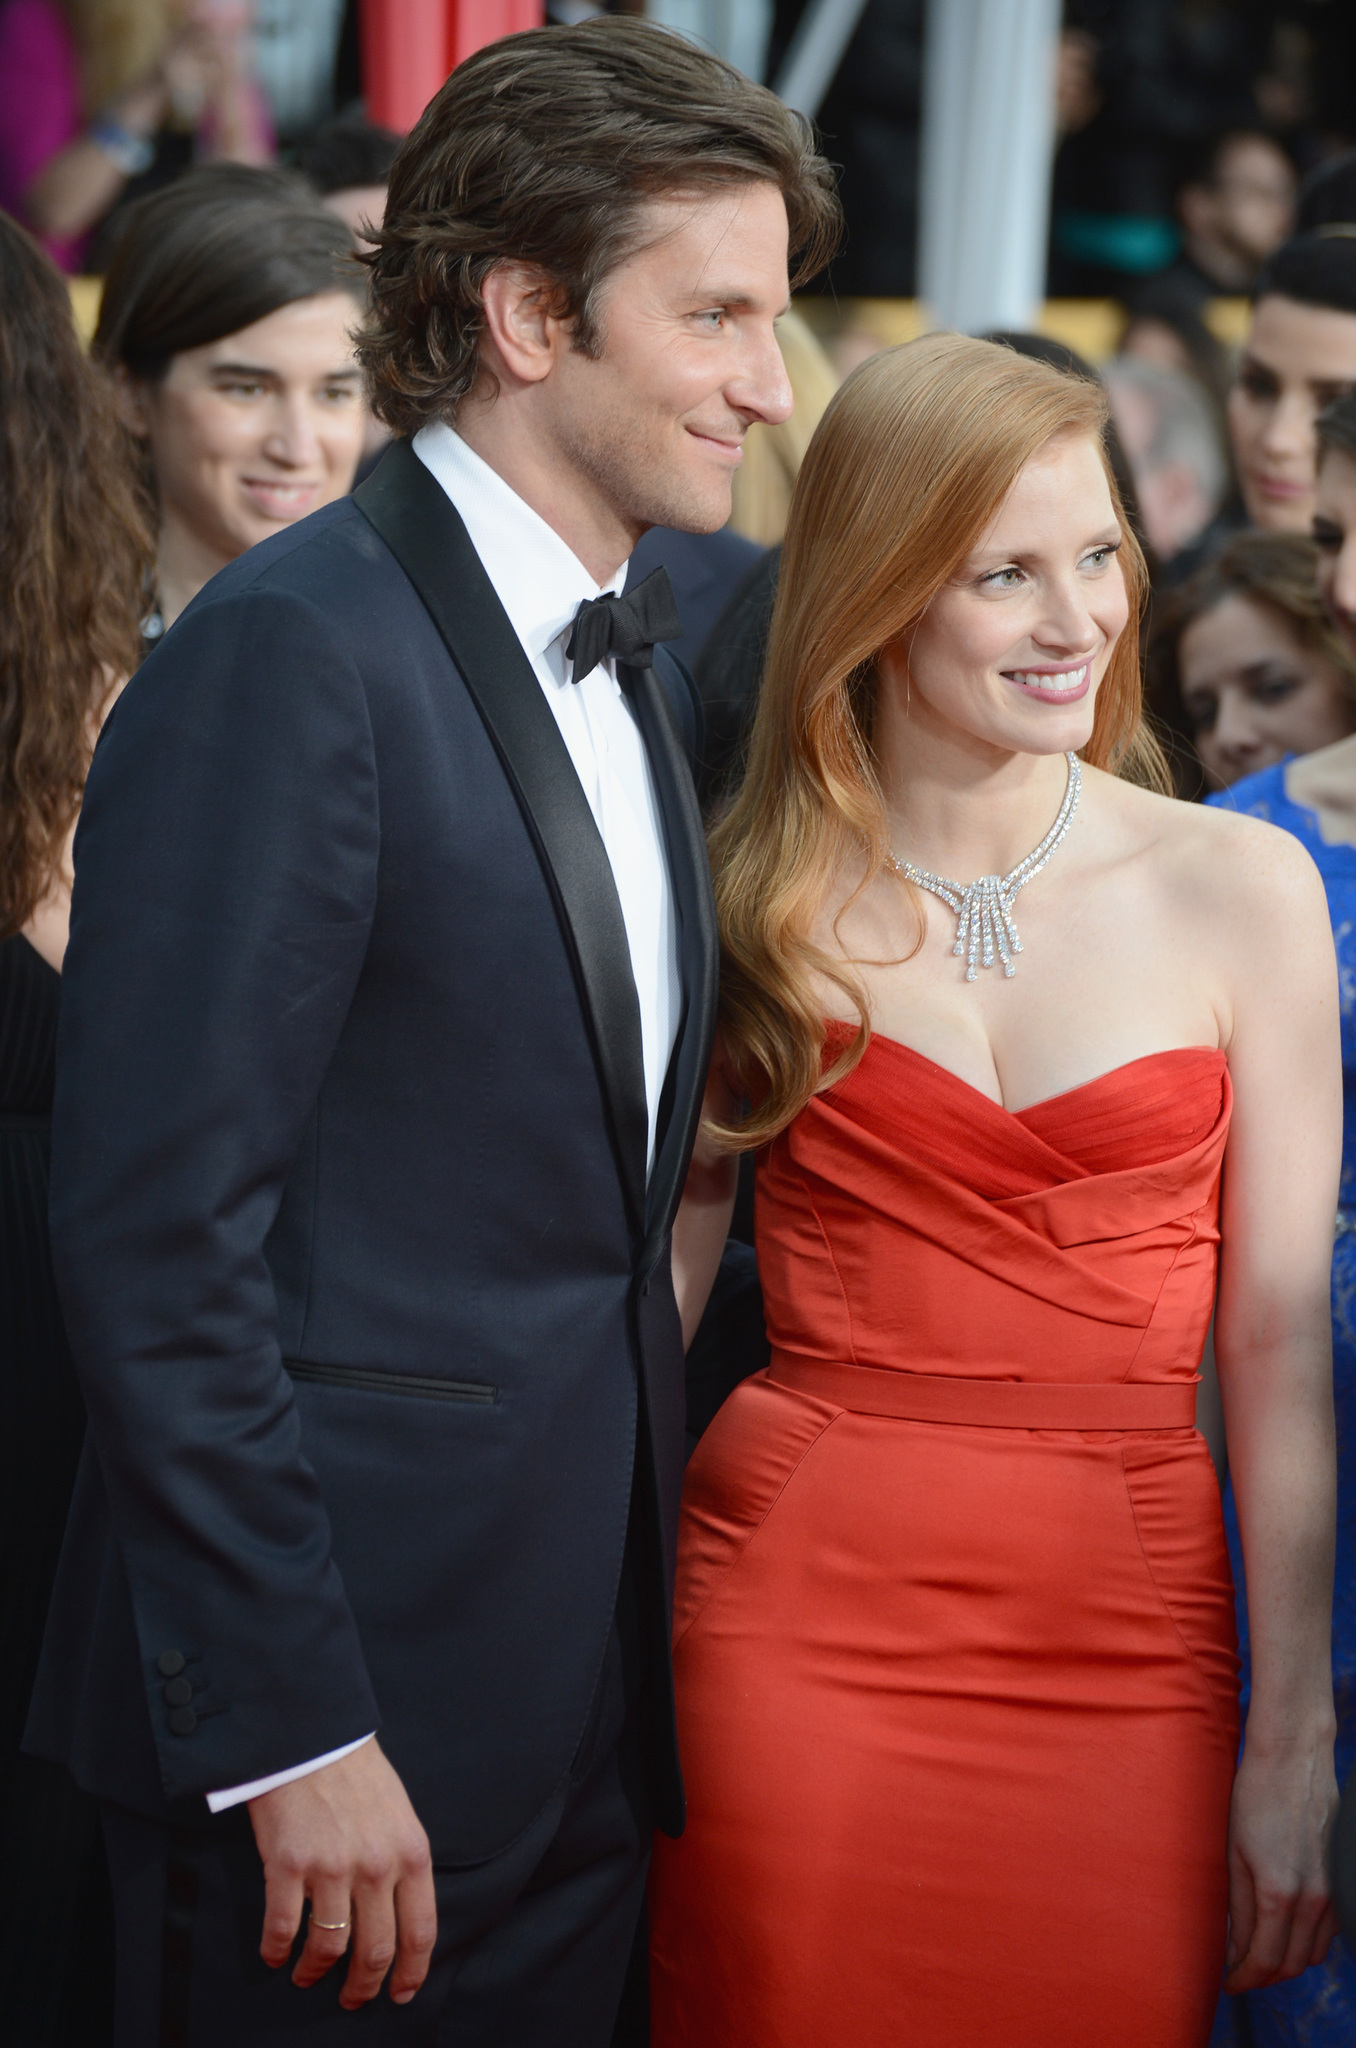 Bradley Cooper and Jessica Chastain